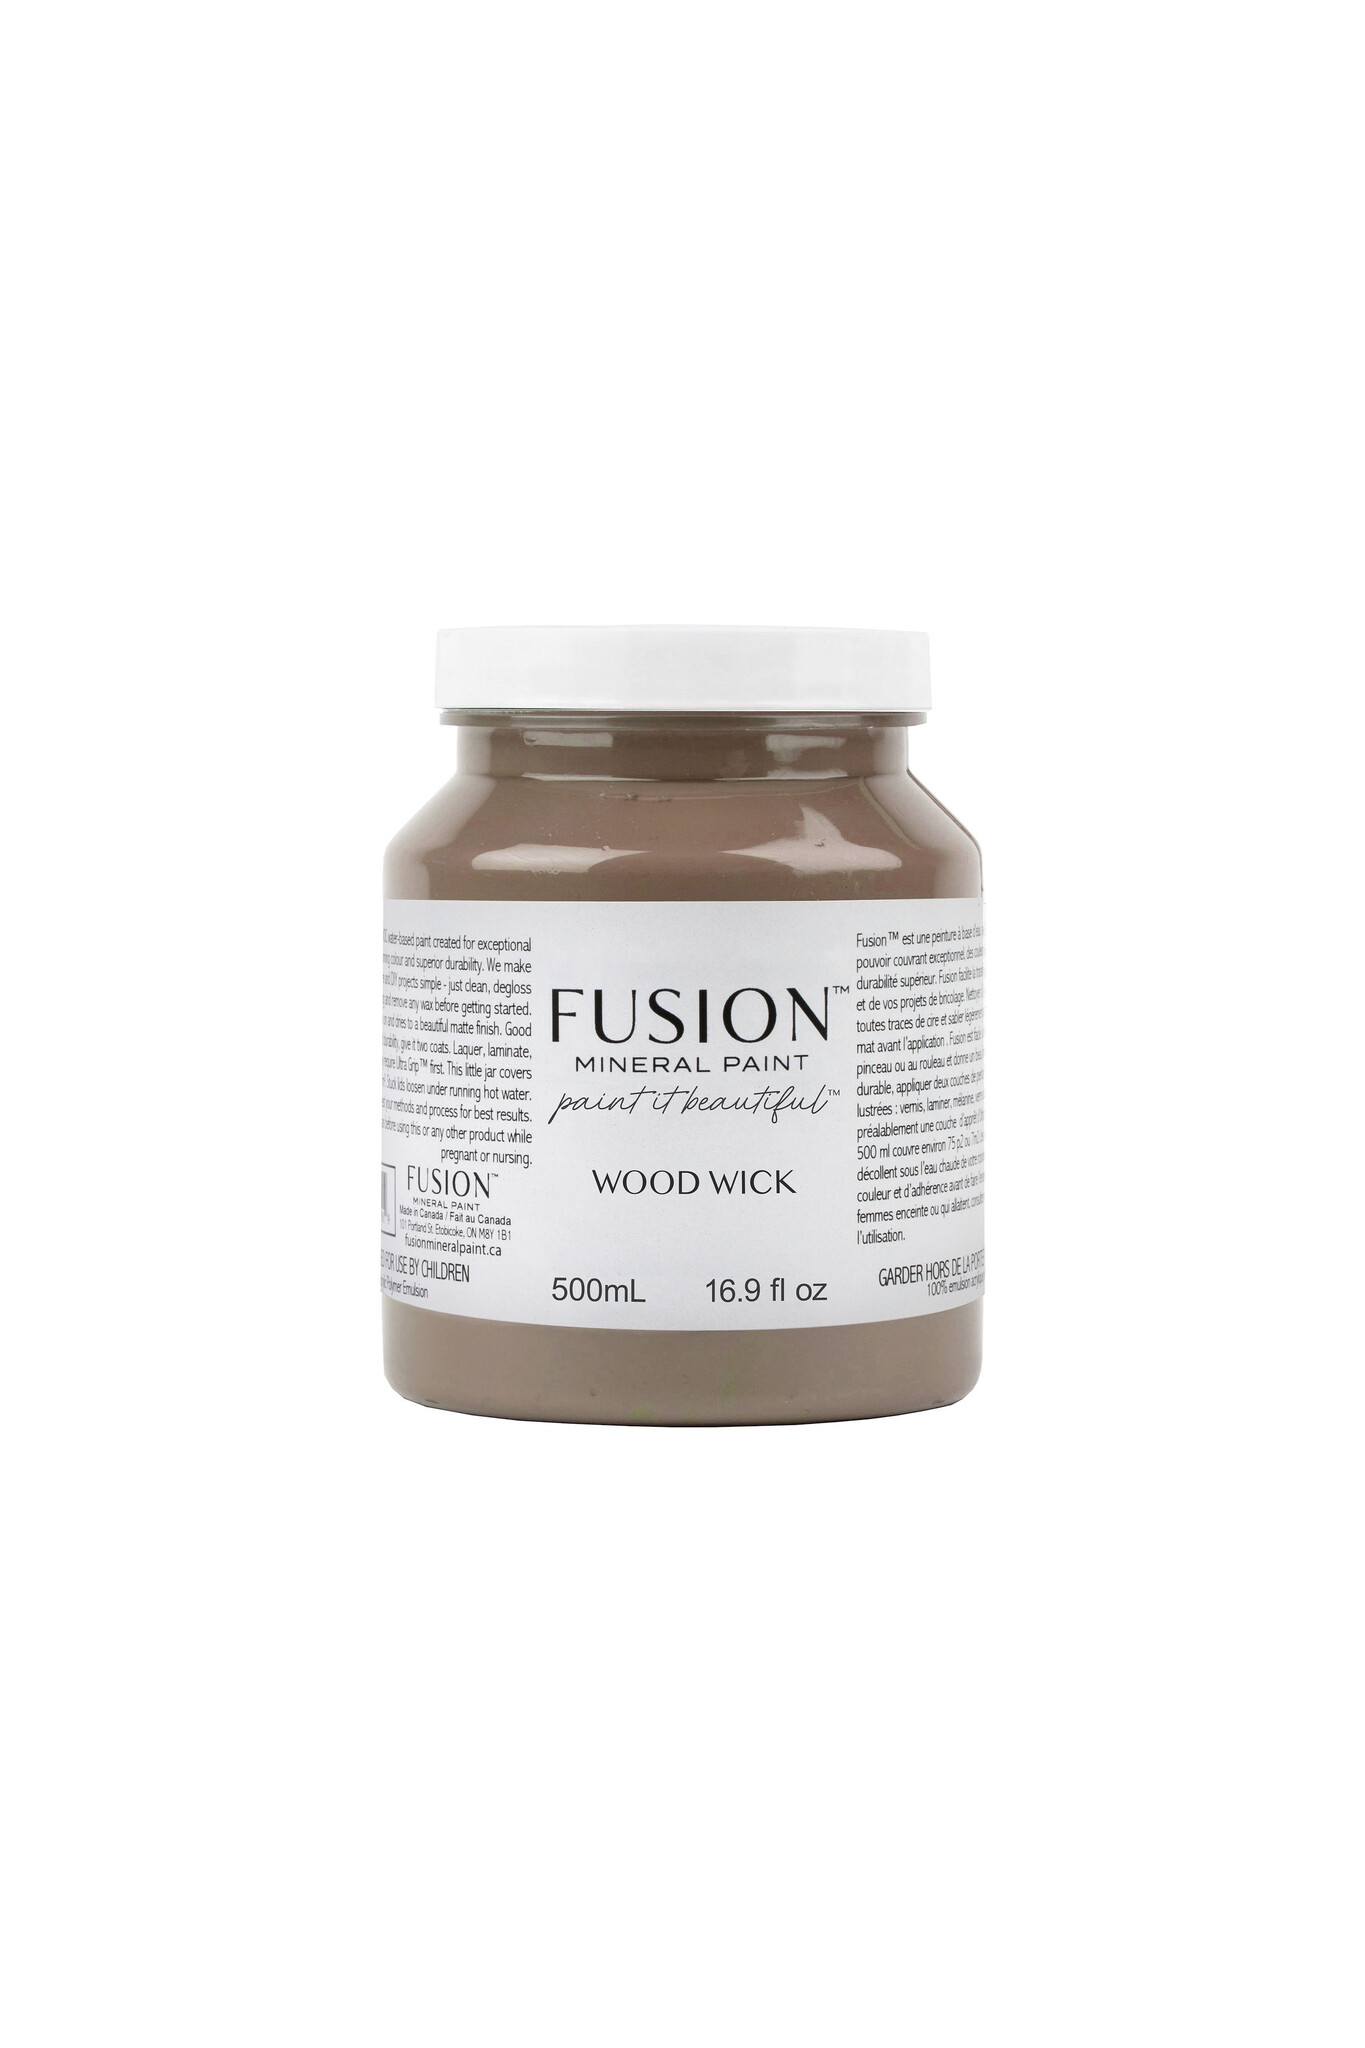 Fusion Mineral Paint Fusion - Wood Wick - 500ml